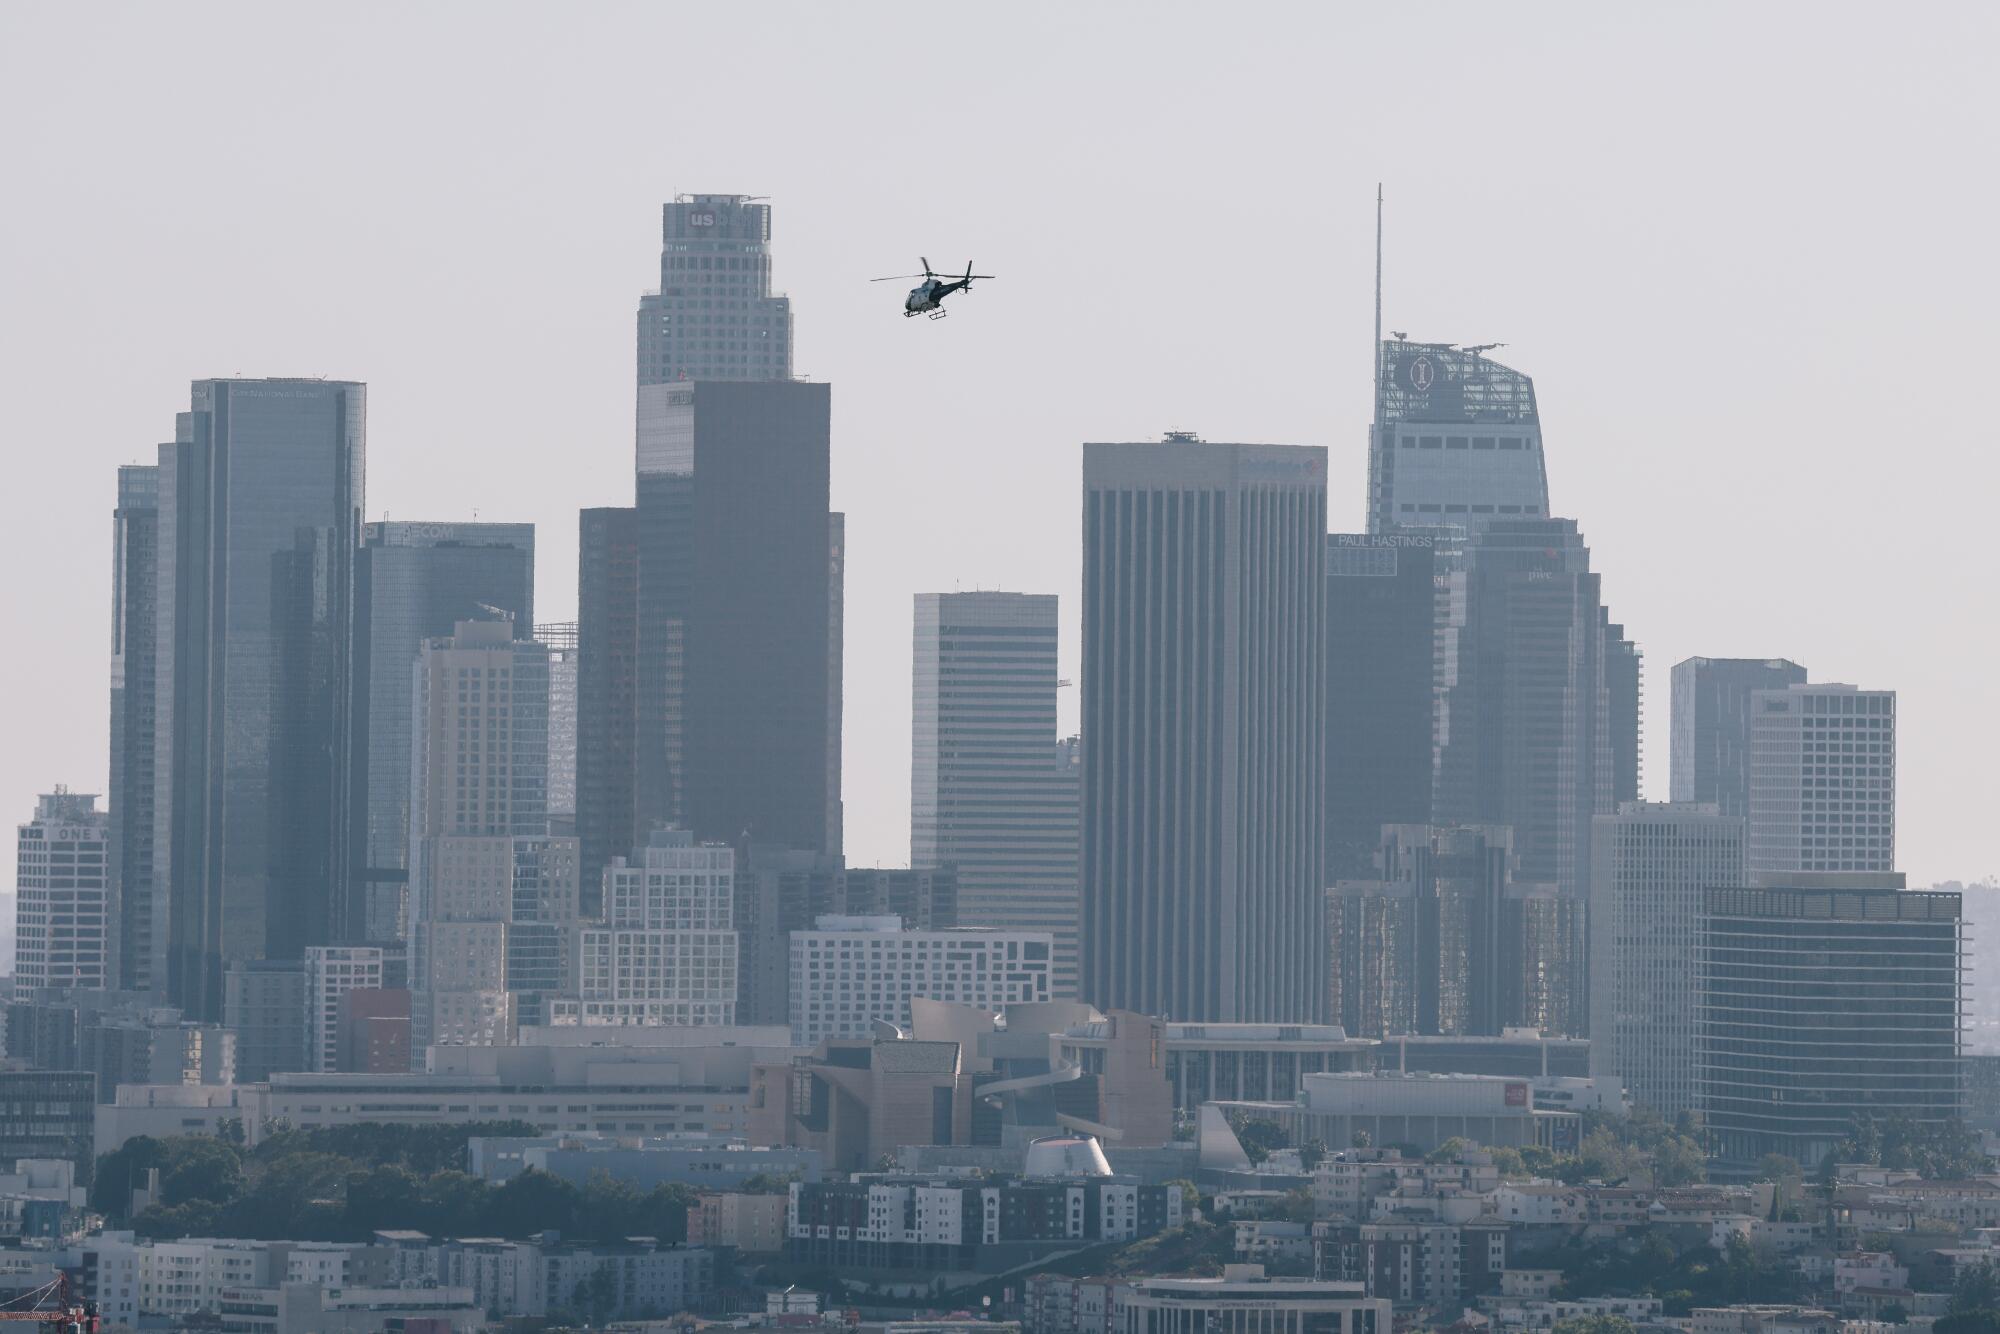  A helicopter hovers over a city skyine.